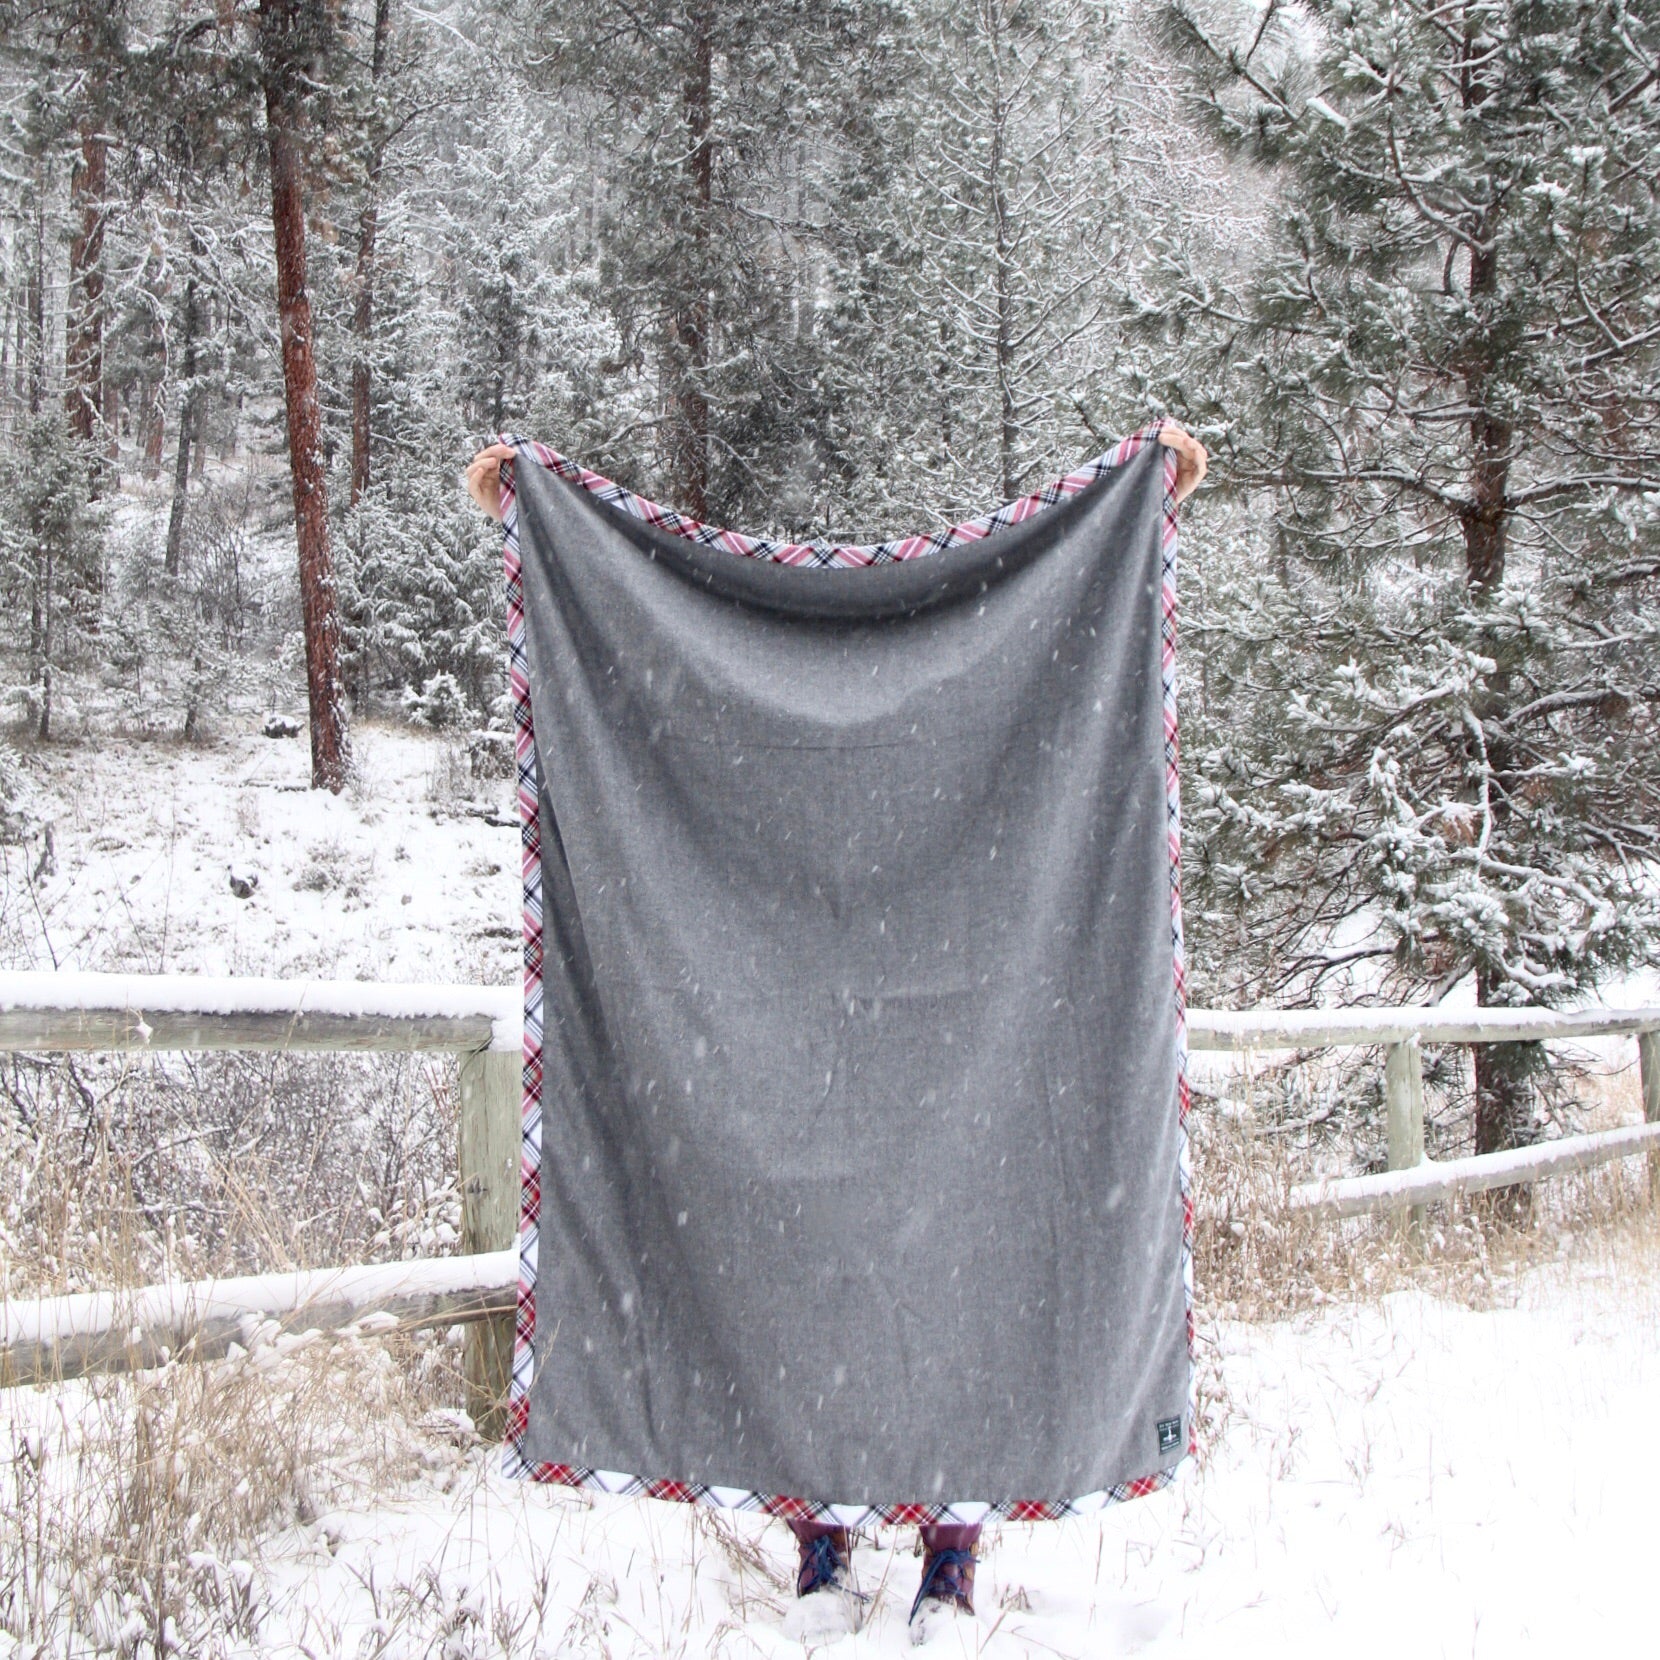 A person holds a gray blanket with flannel trim in front of them in the snow. Snow covered trees and a wooden fence are in the background. 